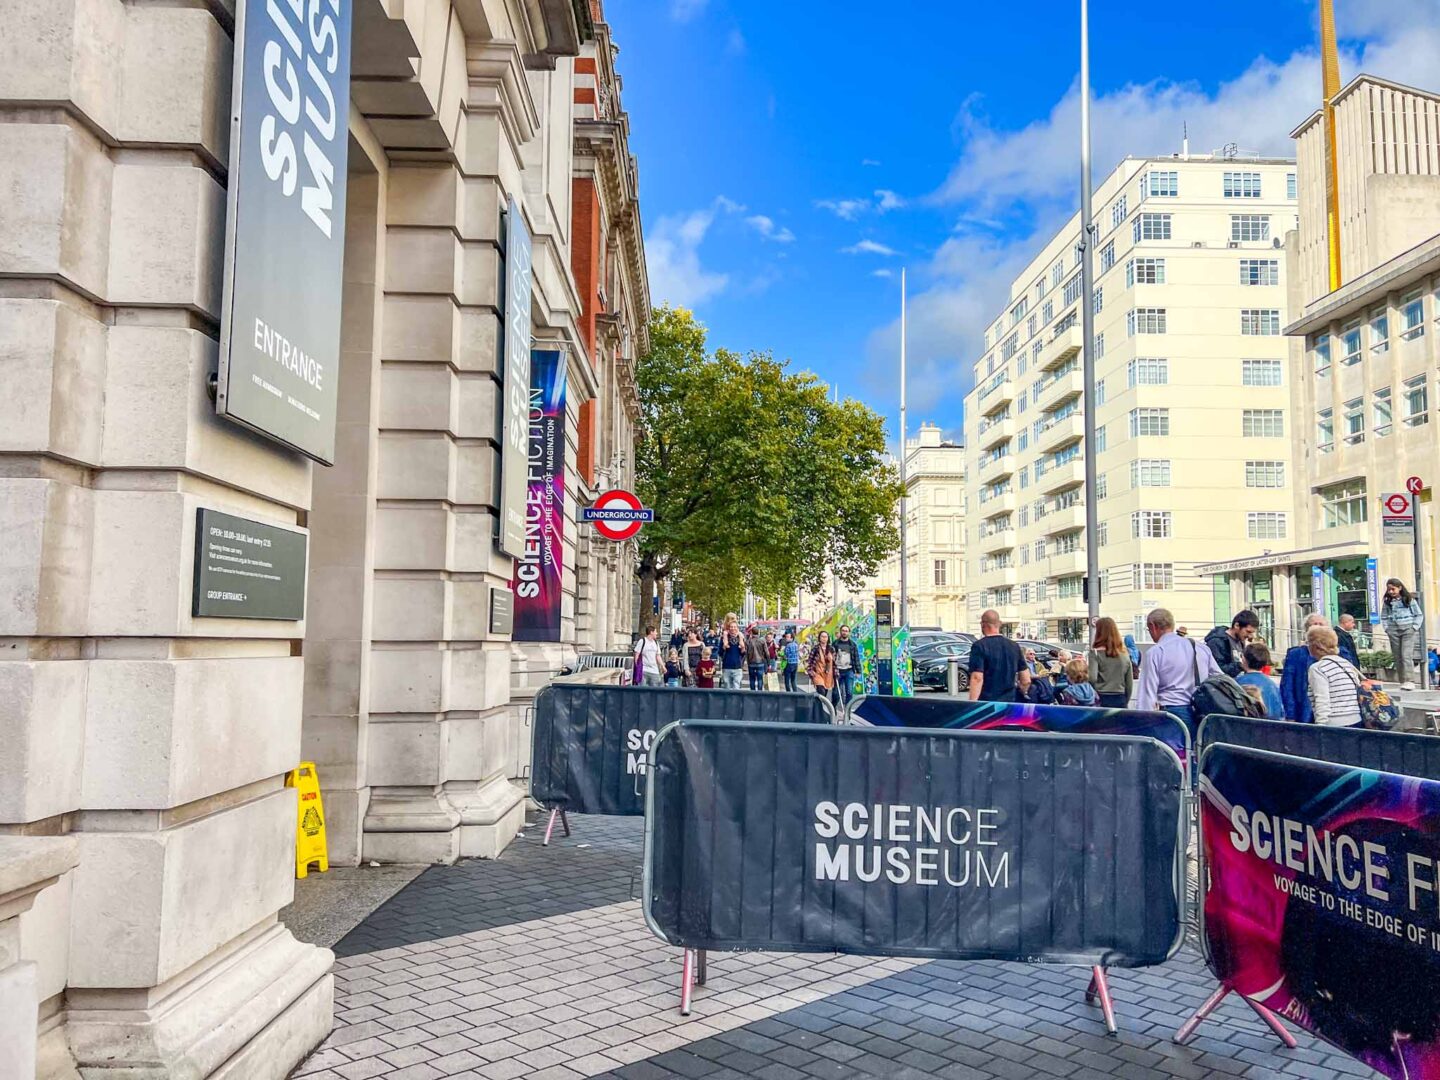 outside entrance to science museum, London with kids, London with kids itinerary, 